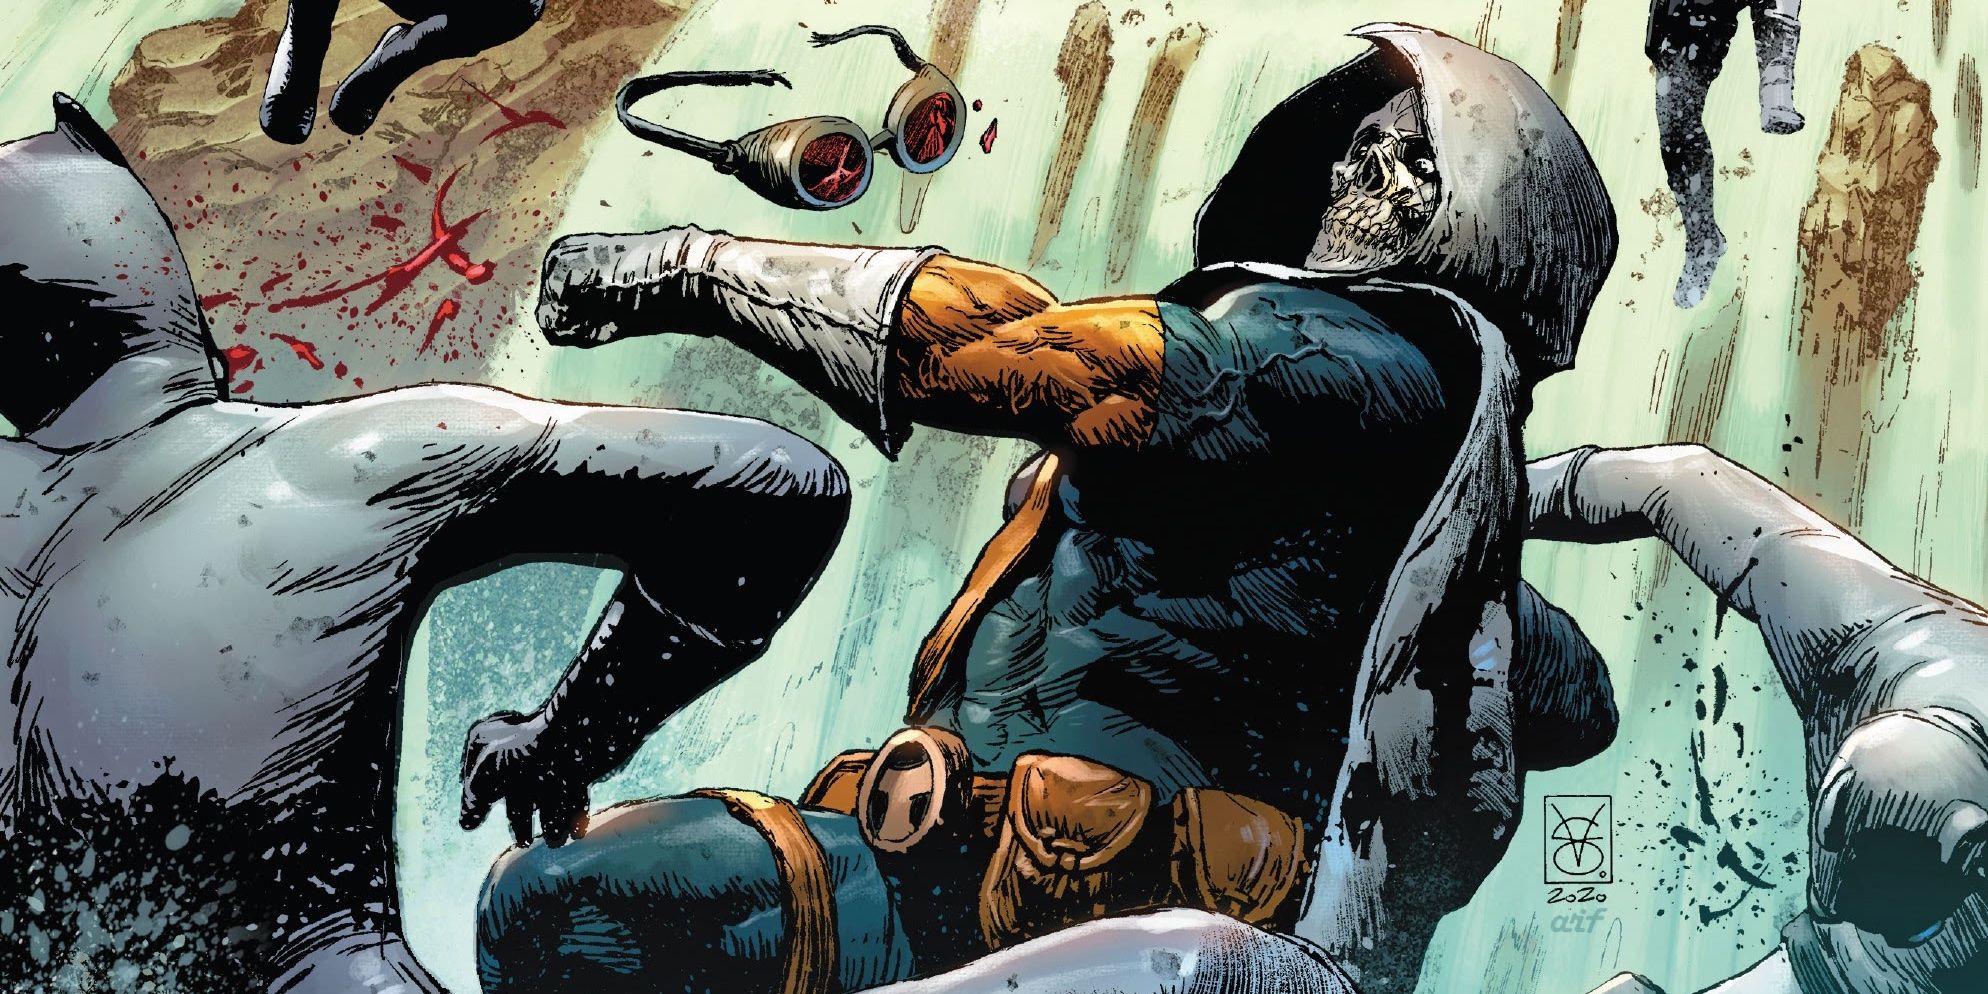 Taskmaster punches a criminal in full gear in the Marvel comics